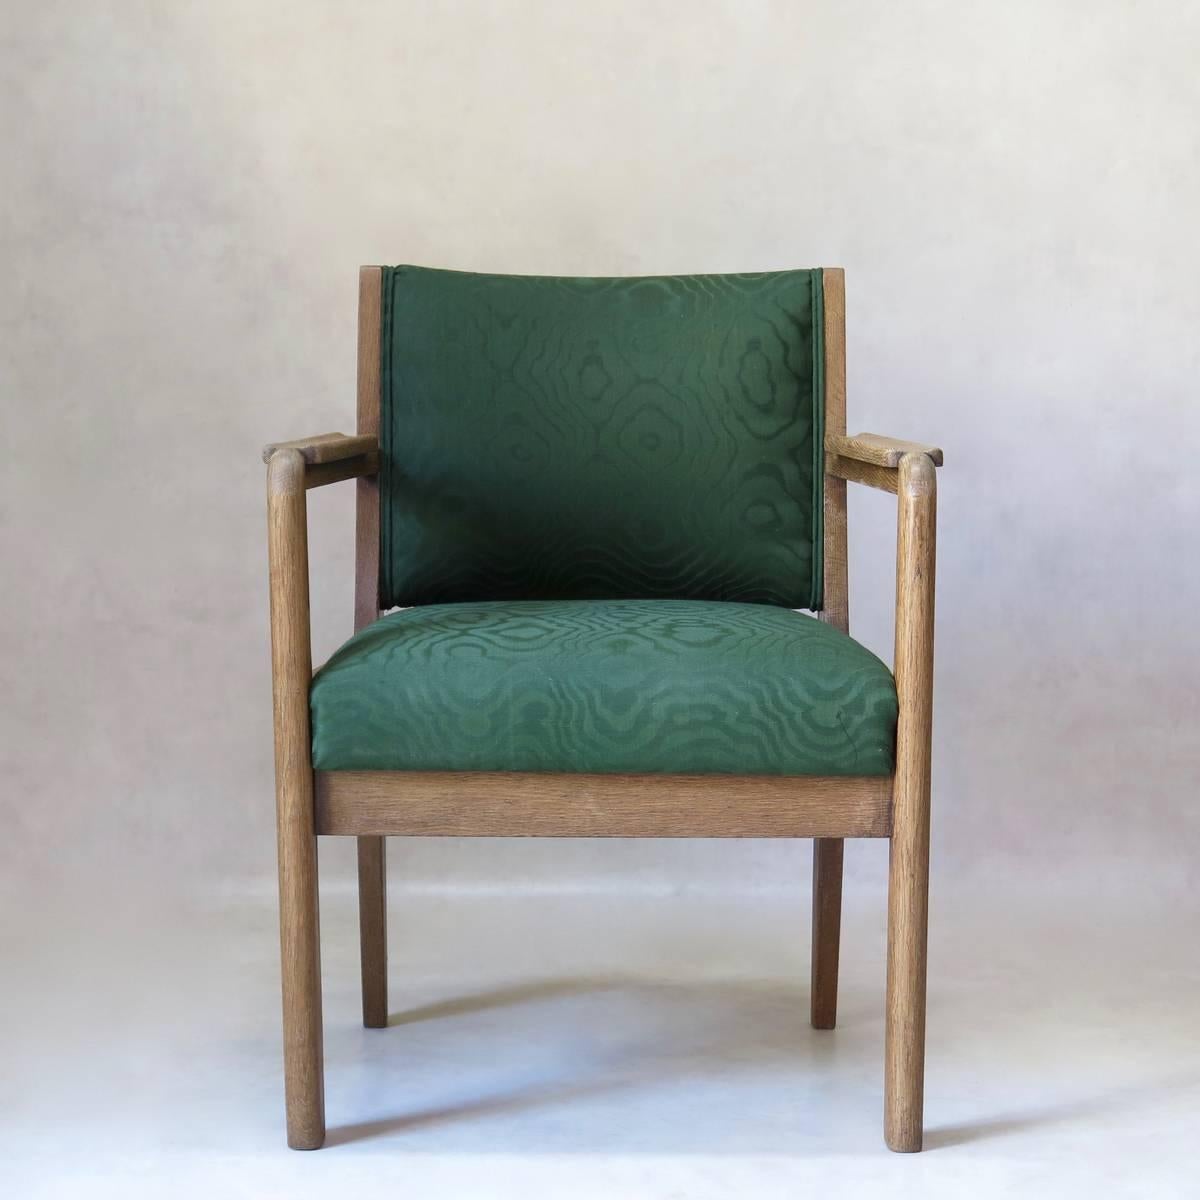 Large and comfortable brushed oak Art Deco armchair of very nice design. Upholstered in green moiré-like cotton fabric.